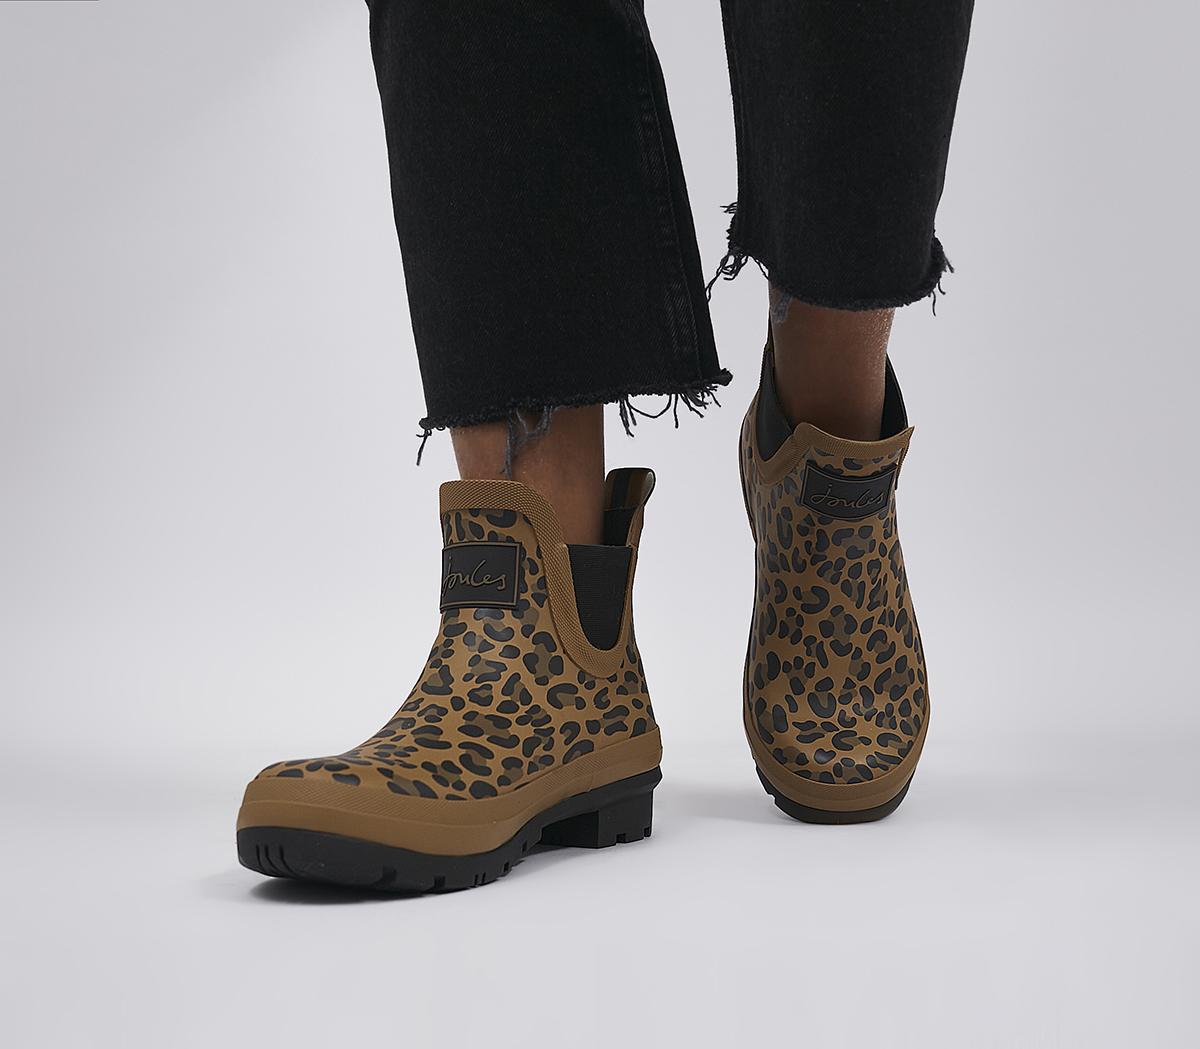 Joules Wellibob Wellies Leopard - Ankle 